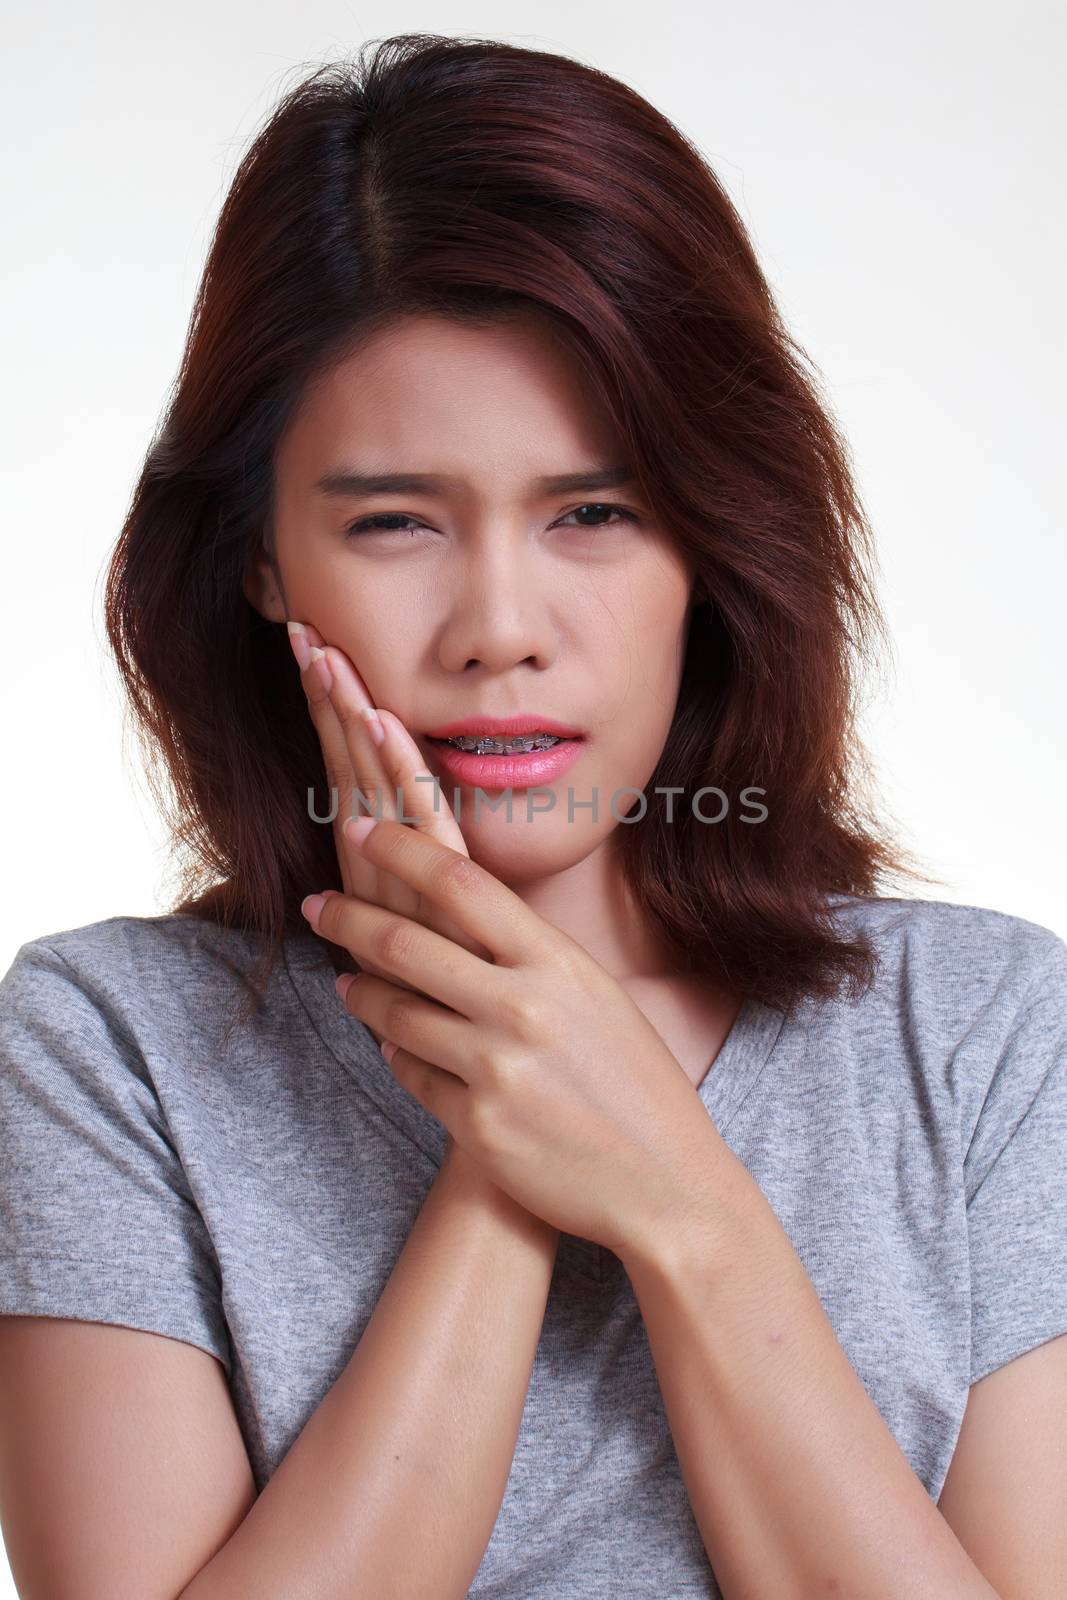 Teen woman pressing her bruised cheek with a painful expression as if she's having a terrible tooth ache.